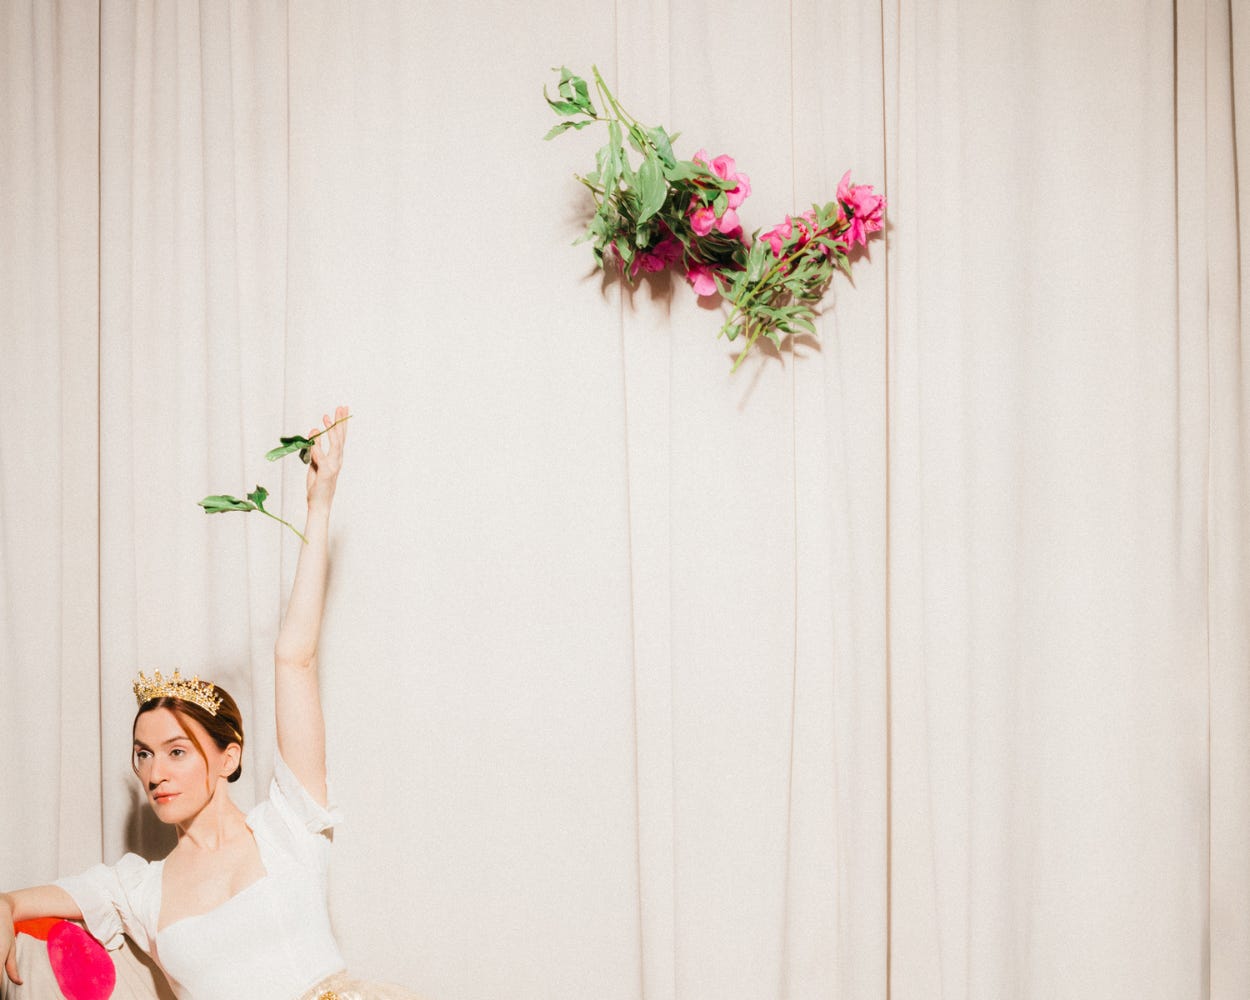 A photo of Cate Scott Campbell tossing flowers, by Mandee Johnson.